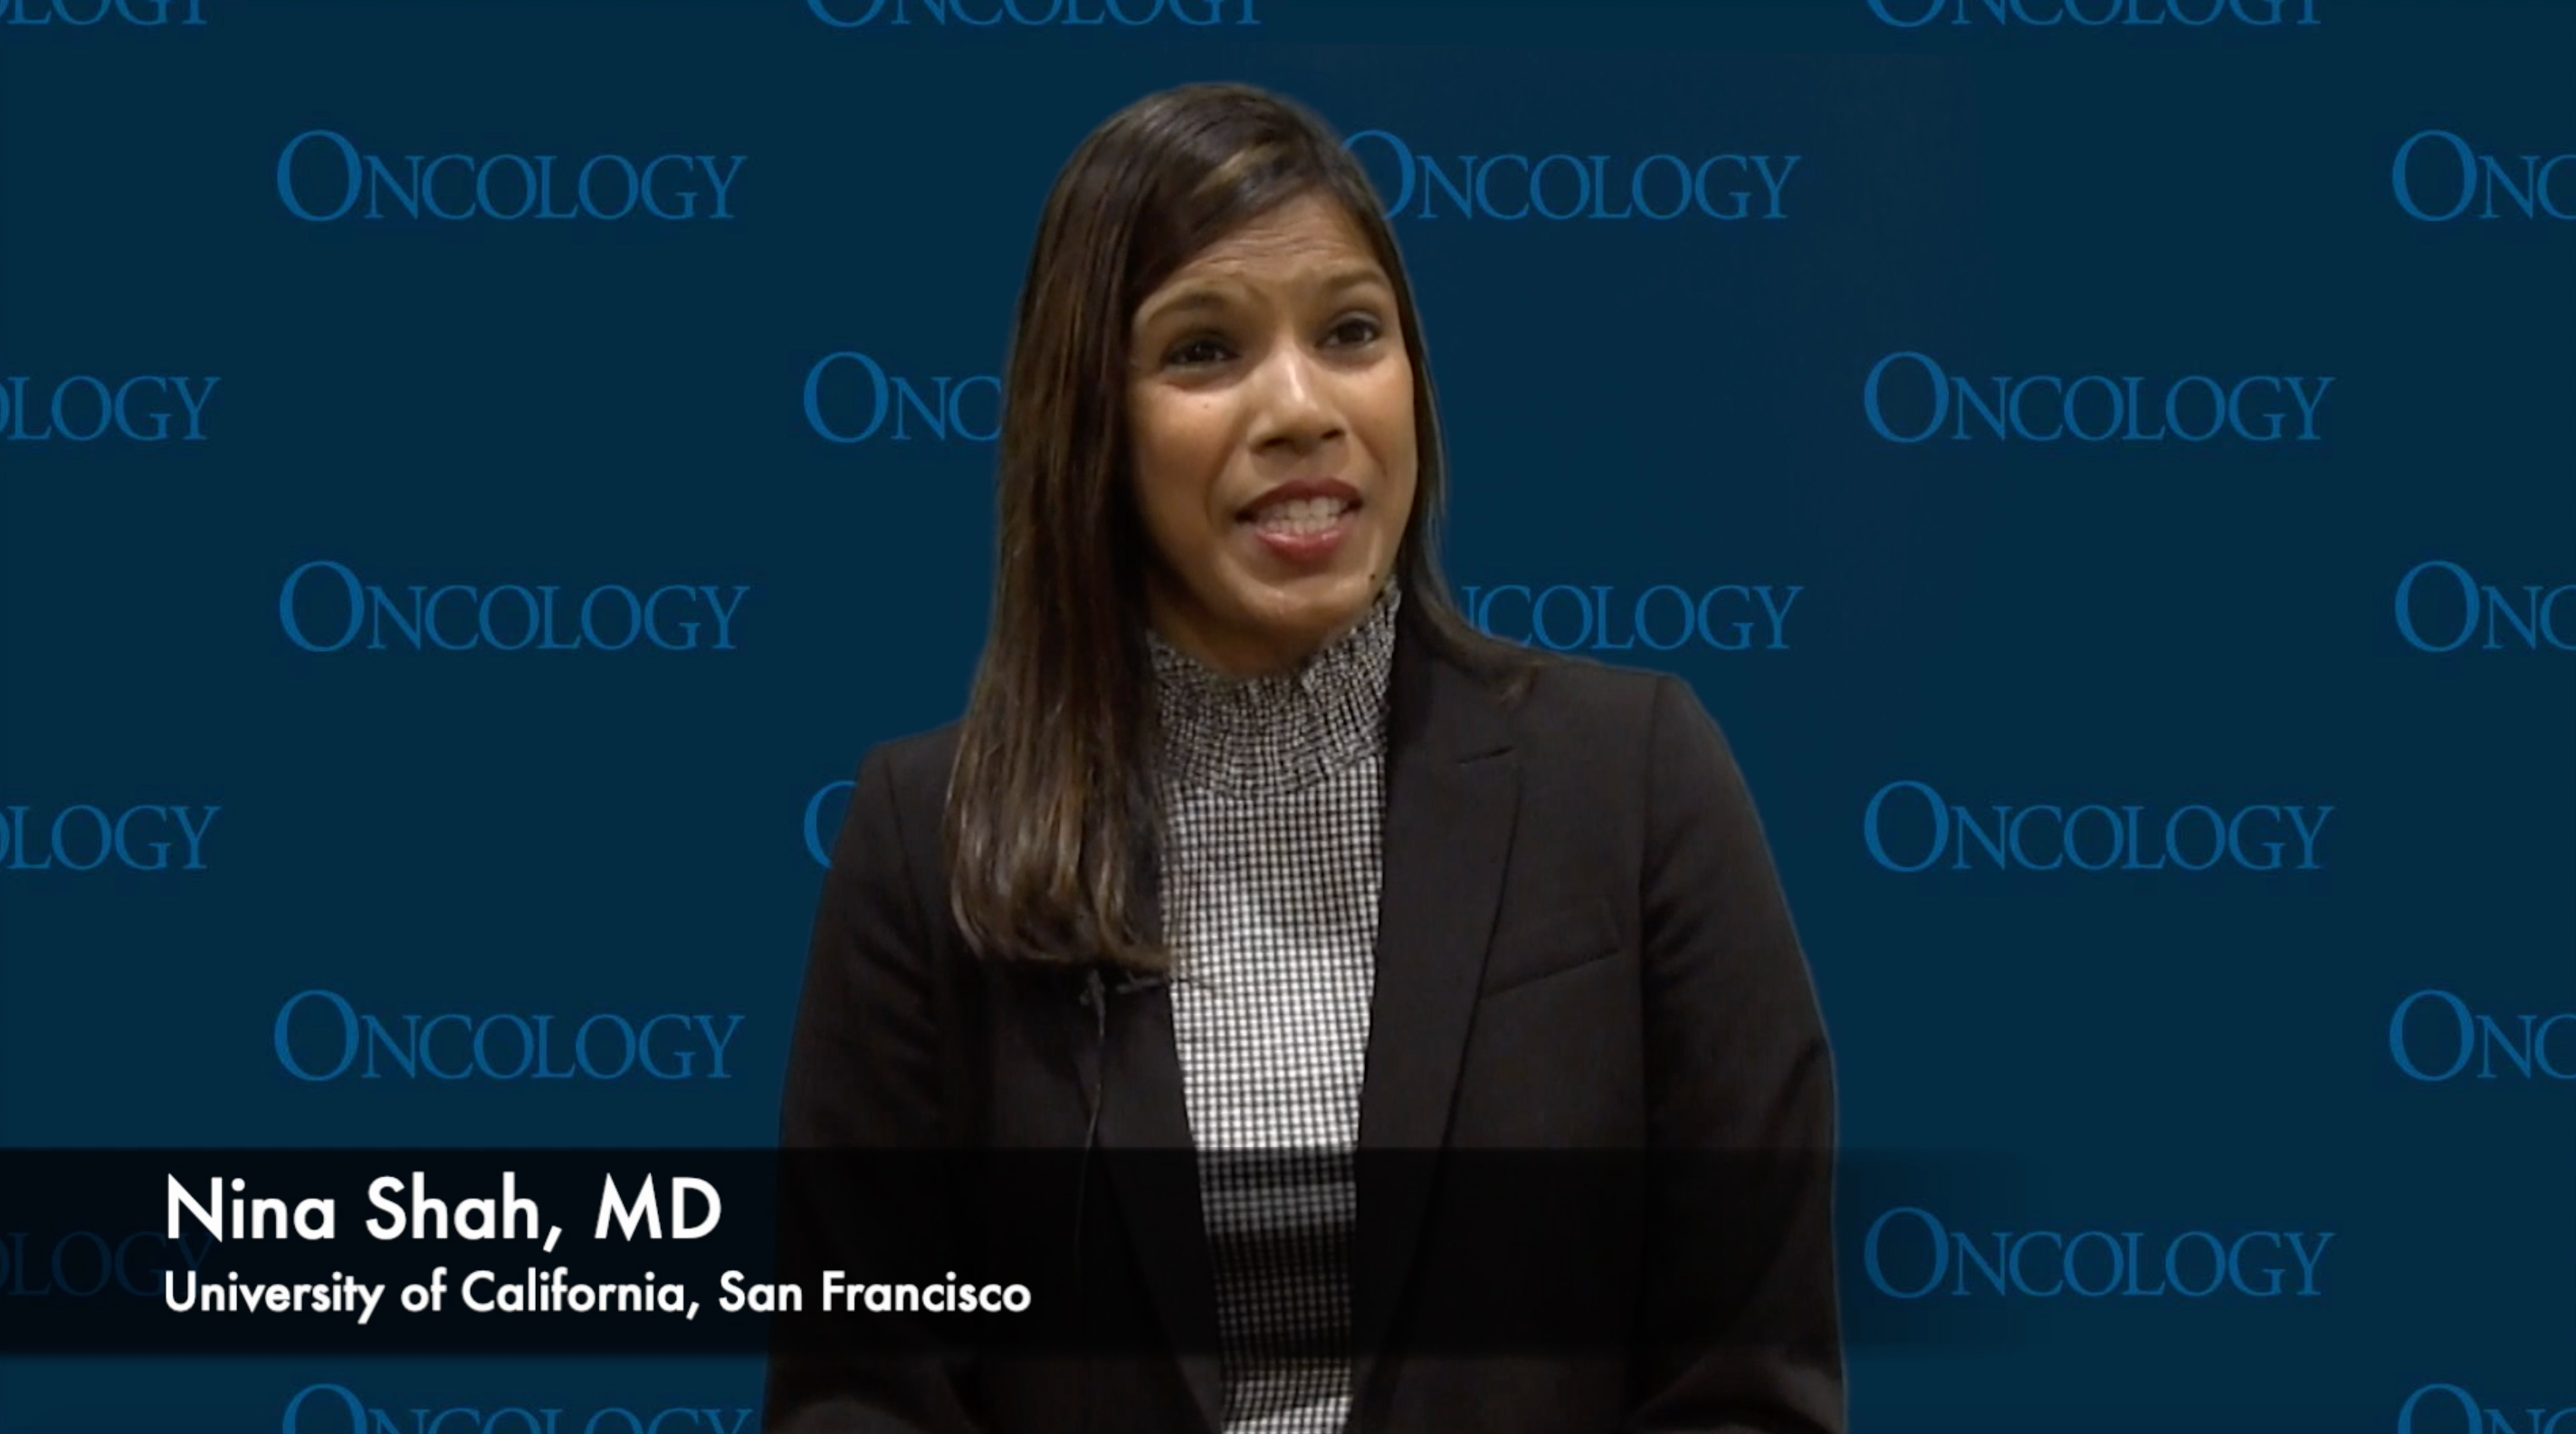 Nina Shah, MD, on the Safety and Efficacy of CAR T-Cell Therapies for Multiple Myeloma